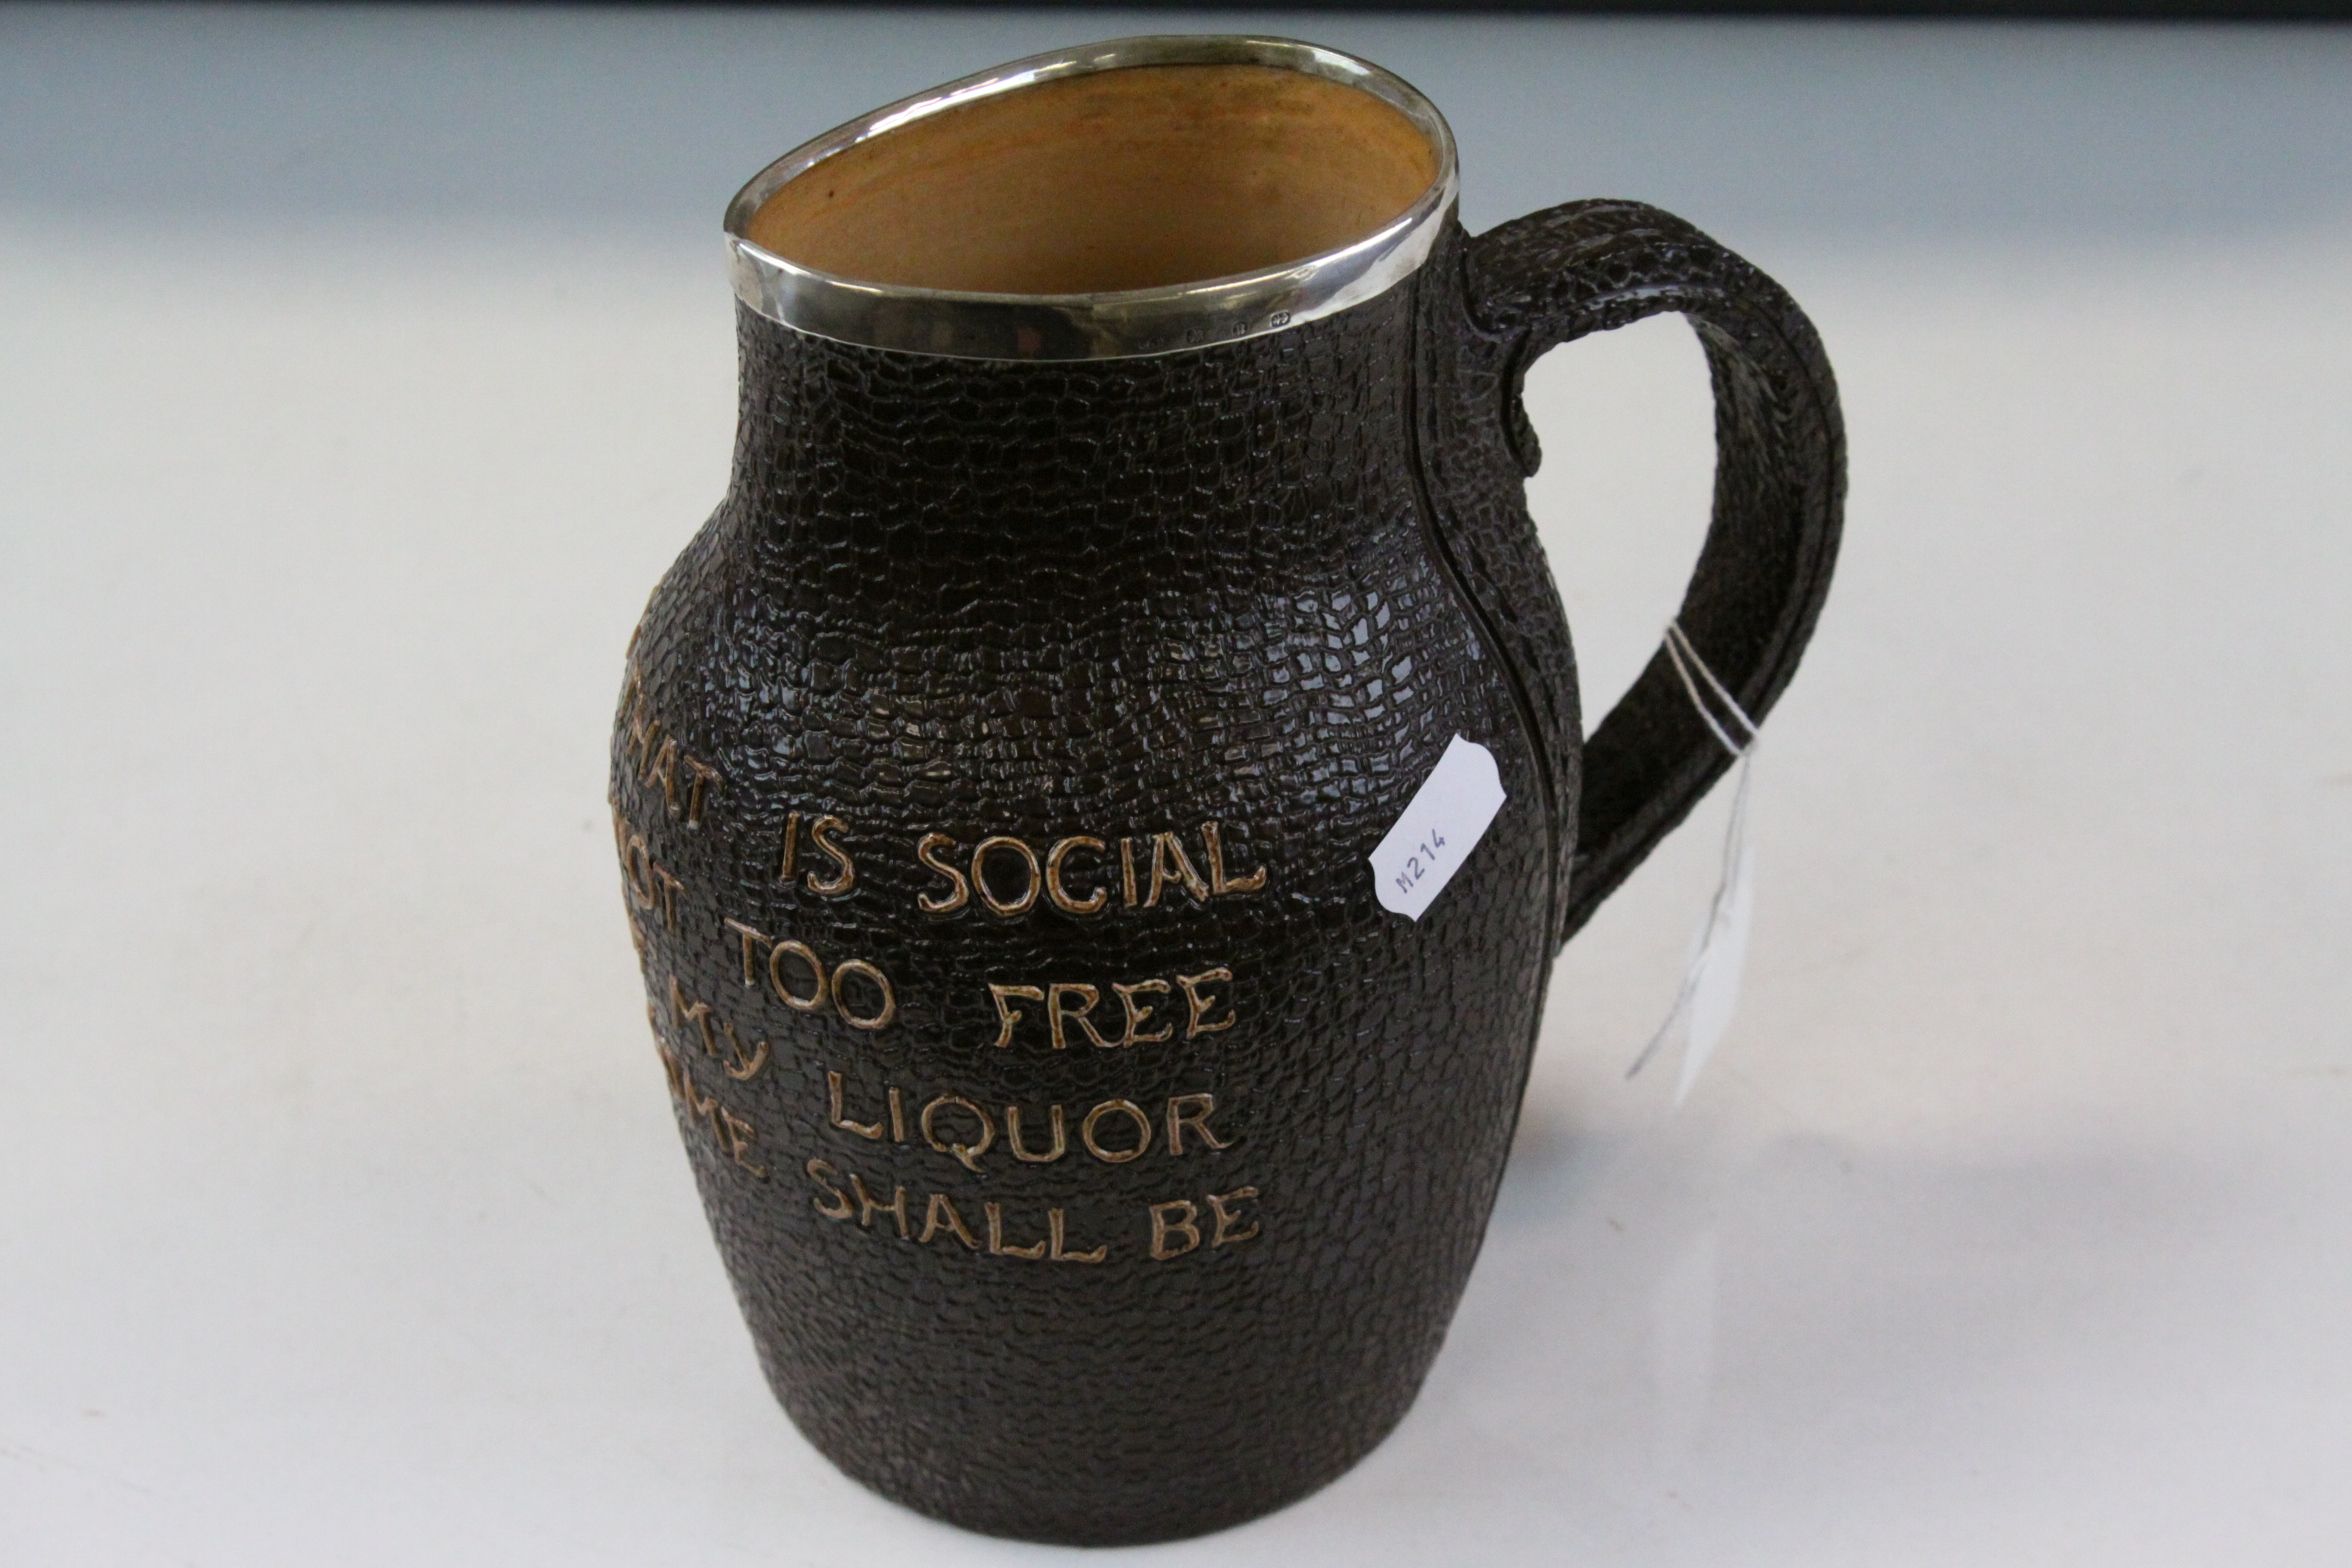 Doulton Lambeth Stater's Patent Stoneware Water jug with Leather effect finish and inscription - Image 8 of 8